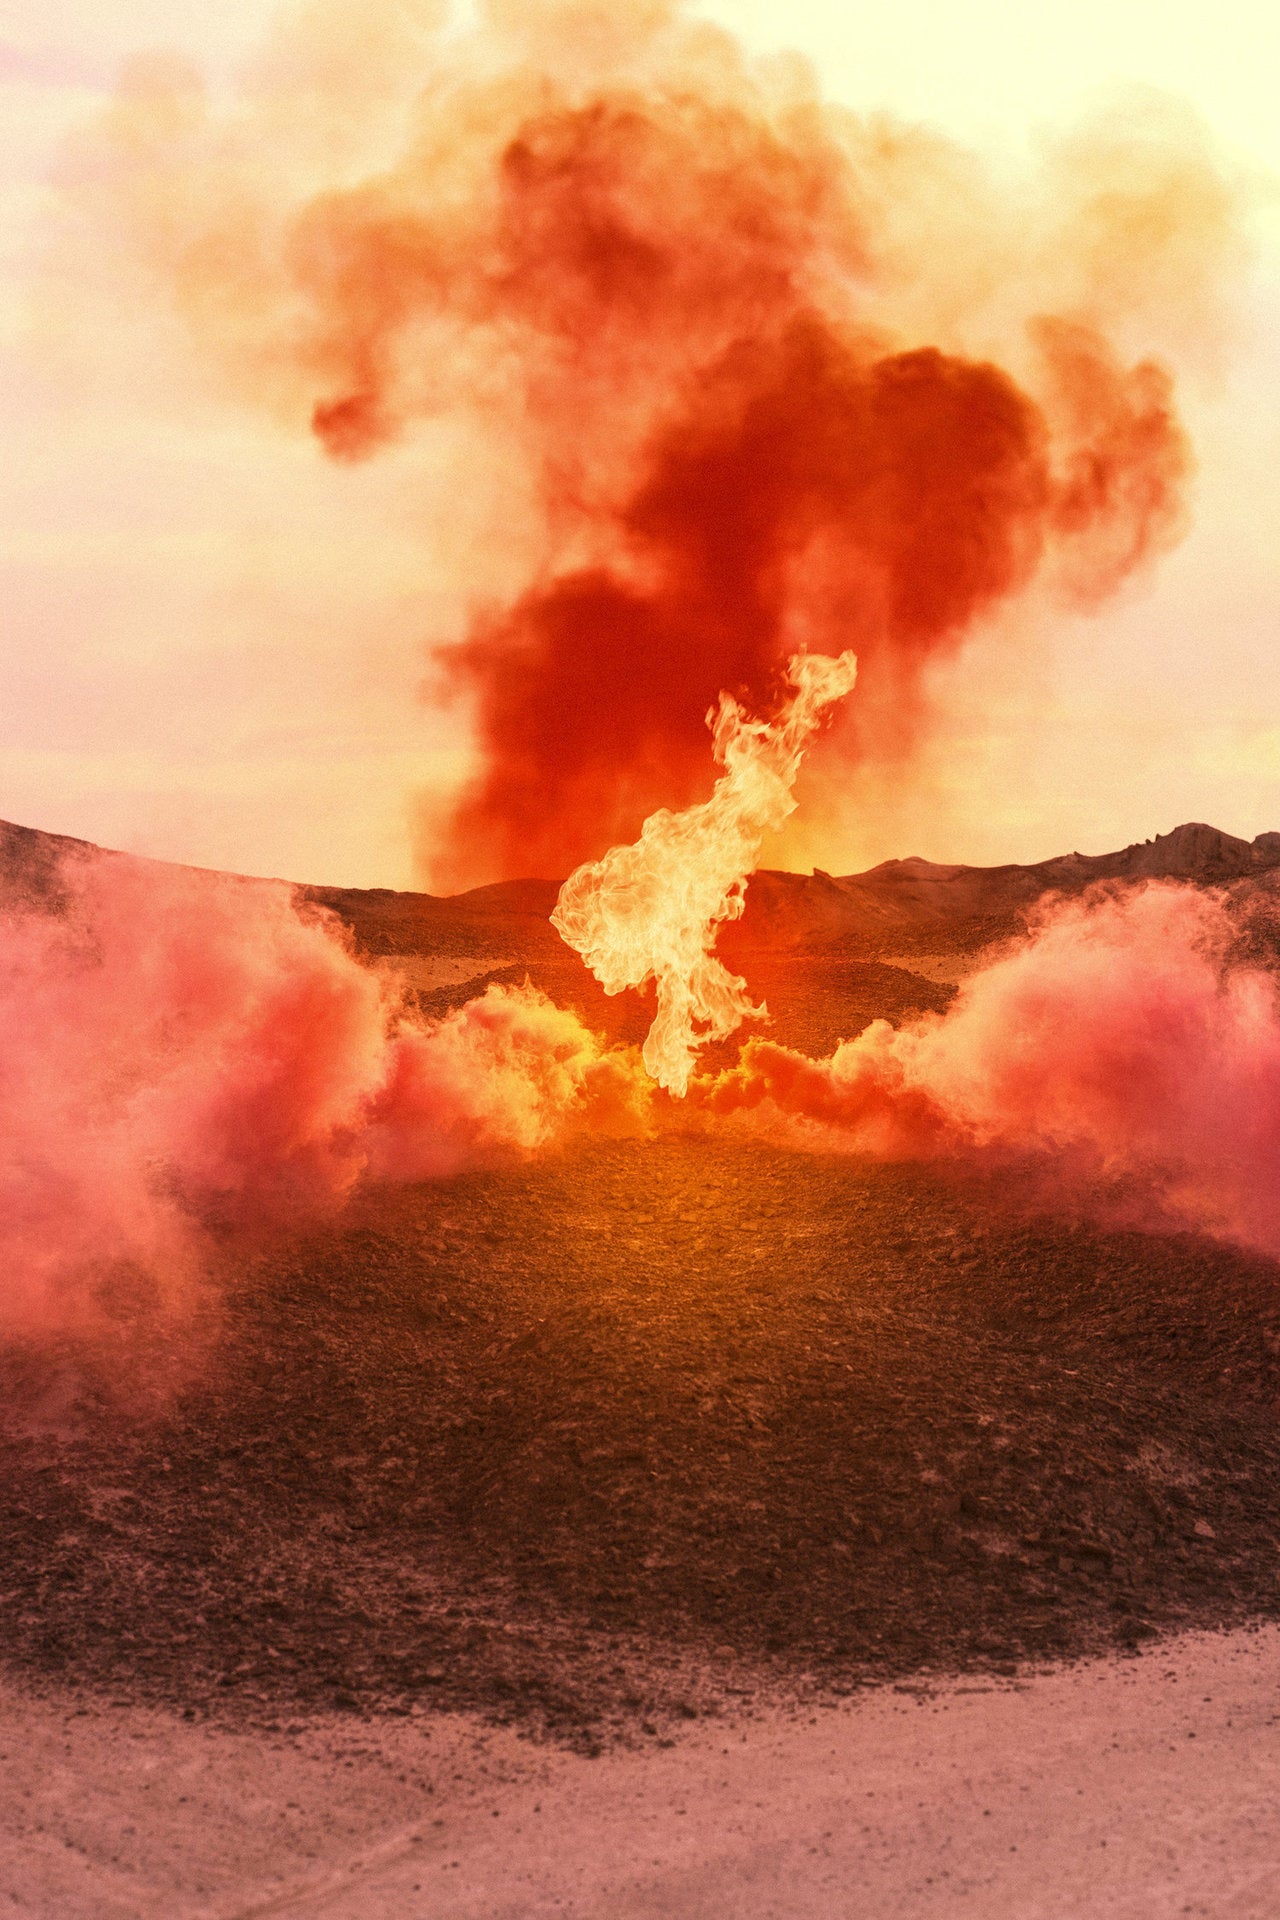 image of large flame on barren landscape and plume of smoke